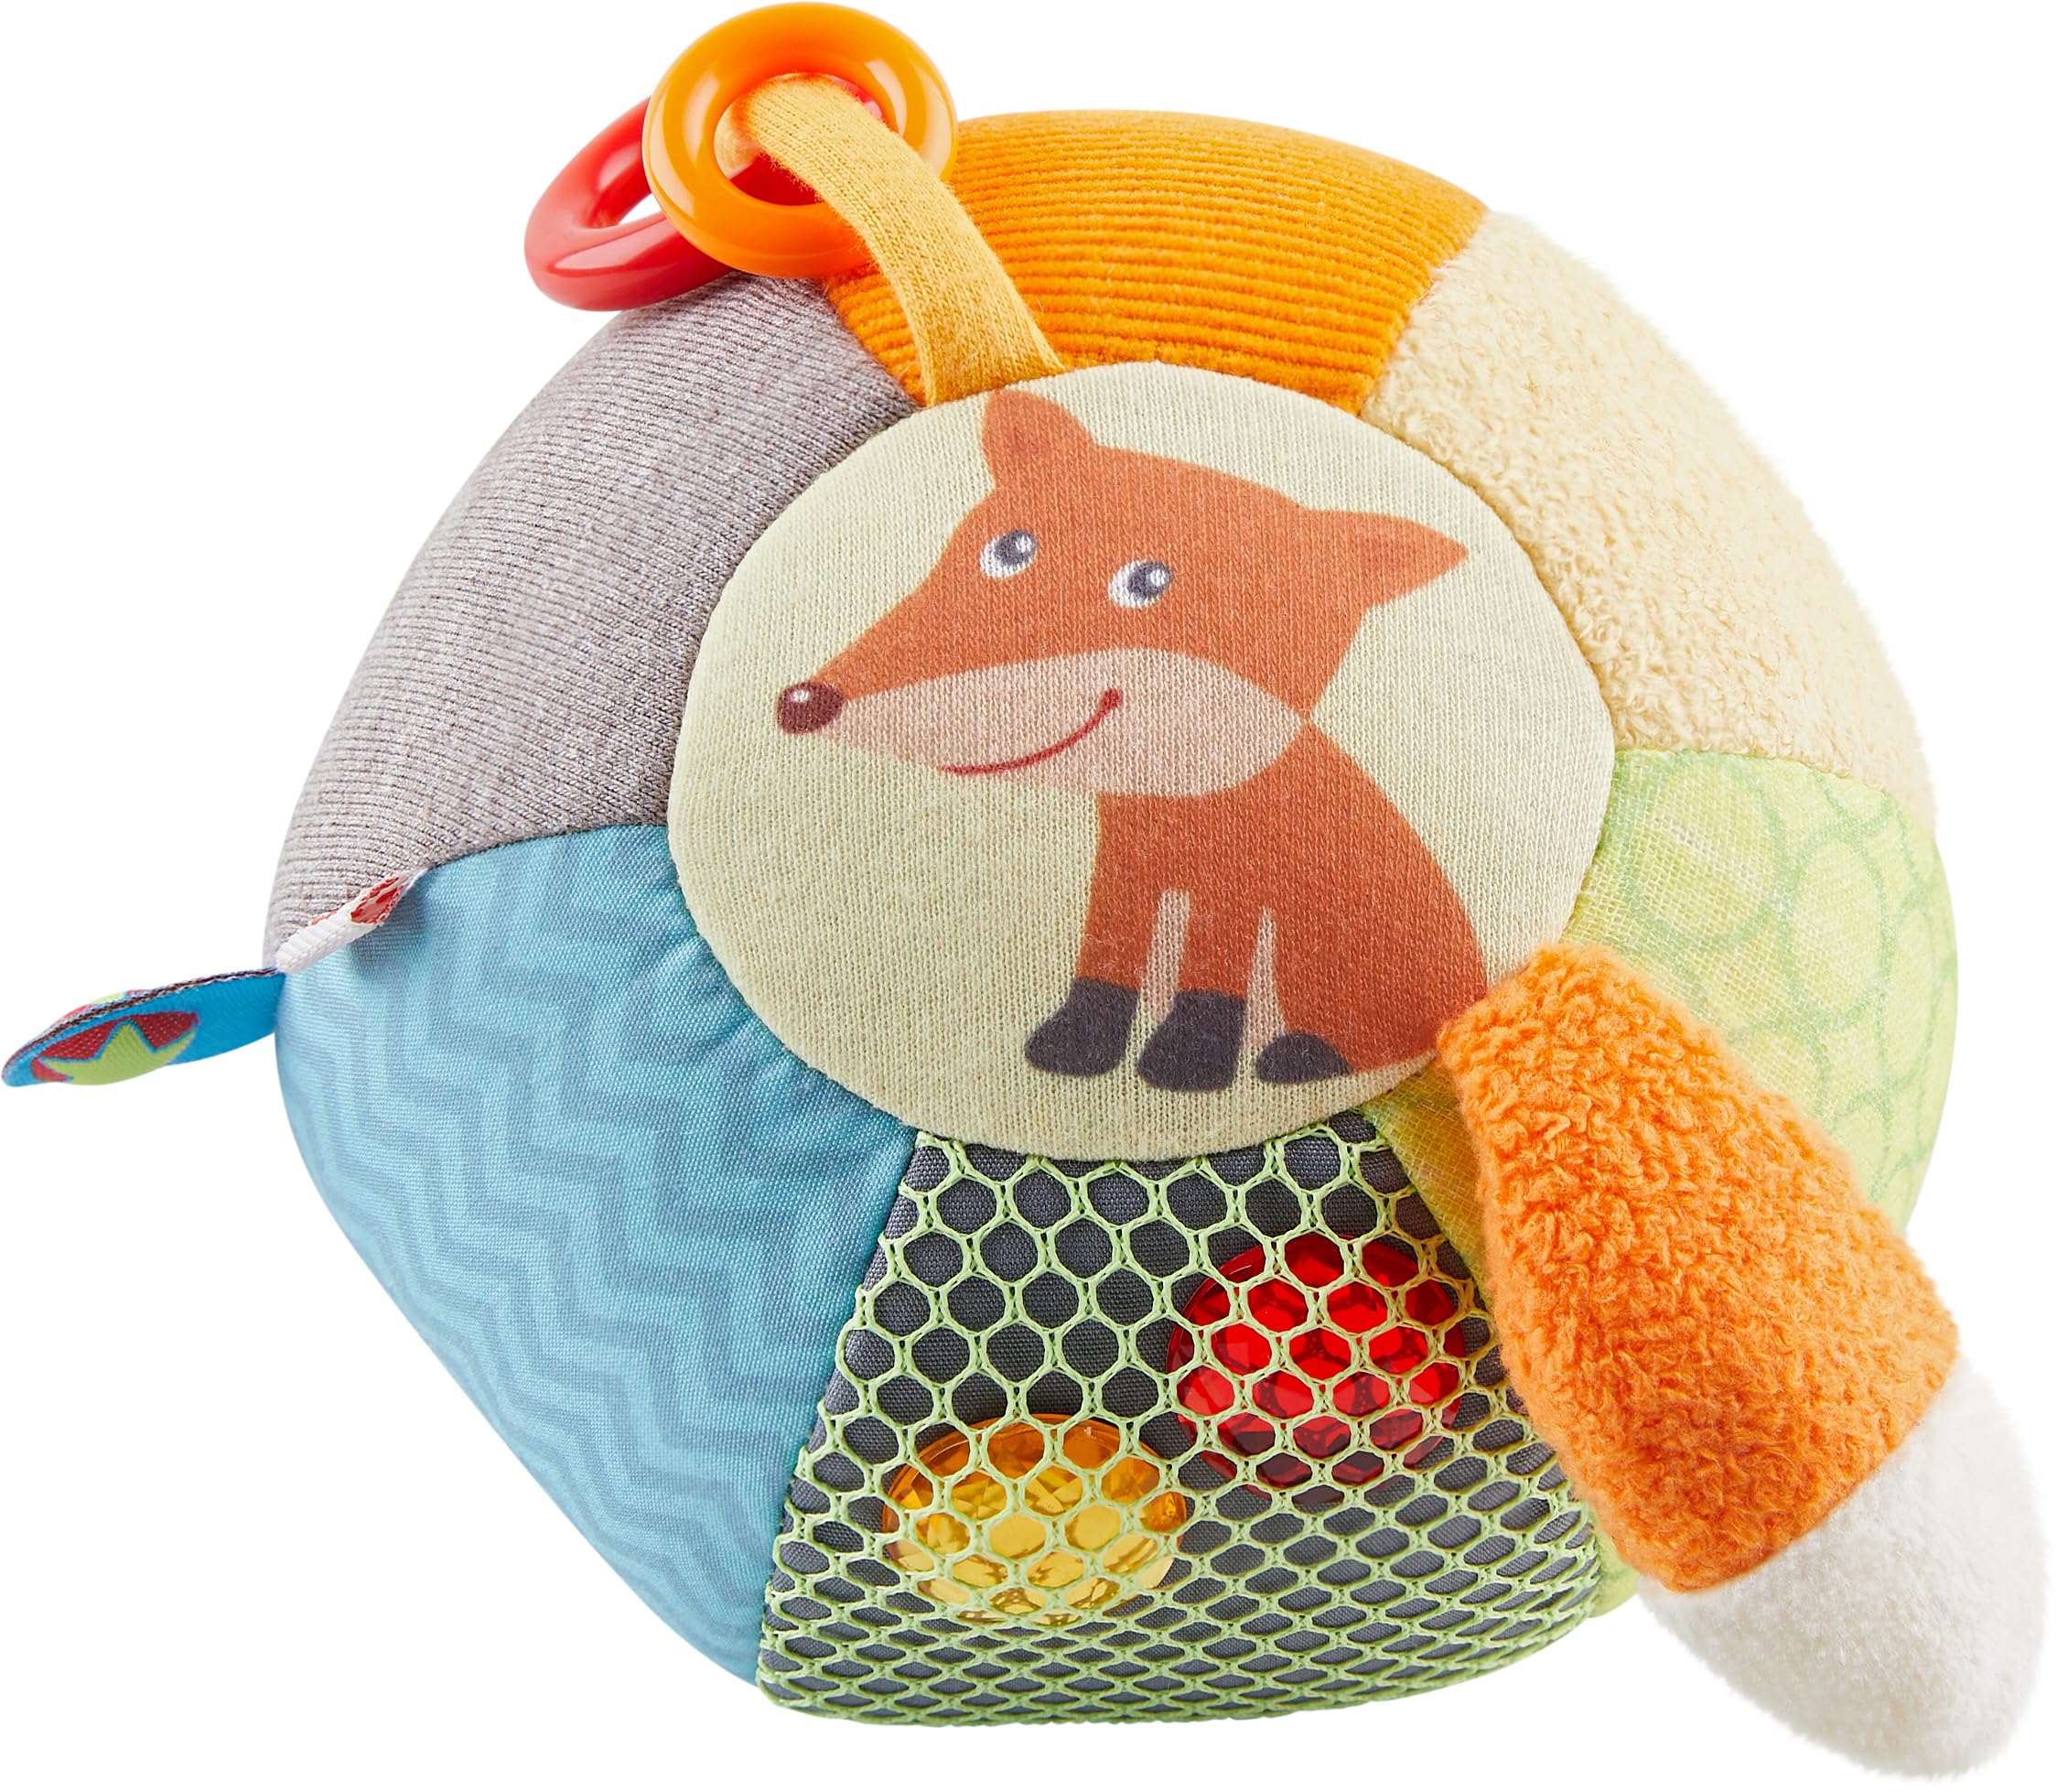 HABA Discovery Forest Friends Sensory Ball for Baby-Early Learning Toy-306893, 306893, Colourful